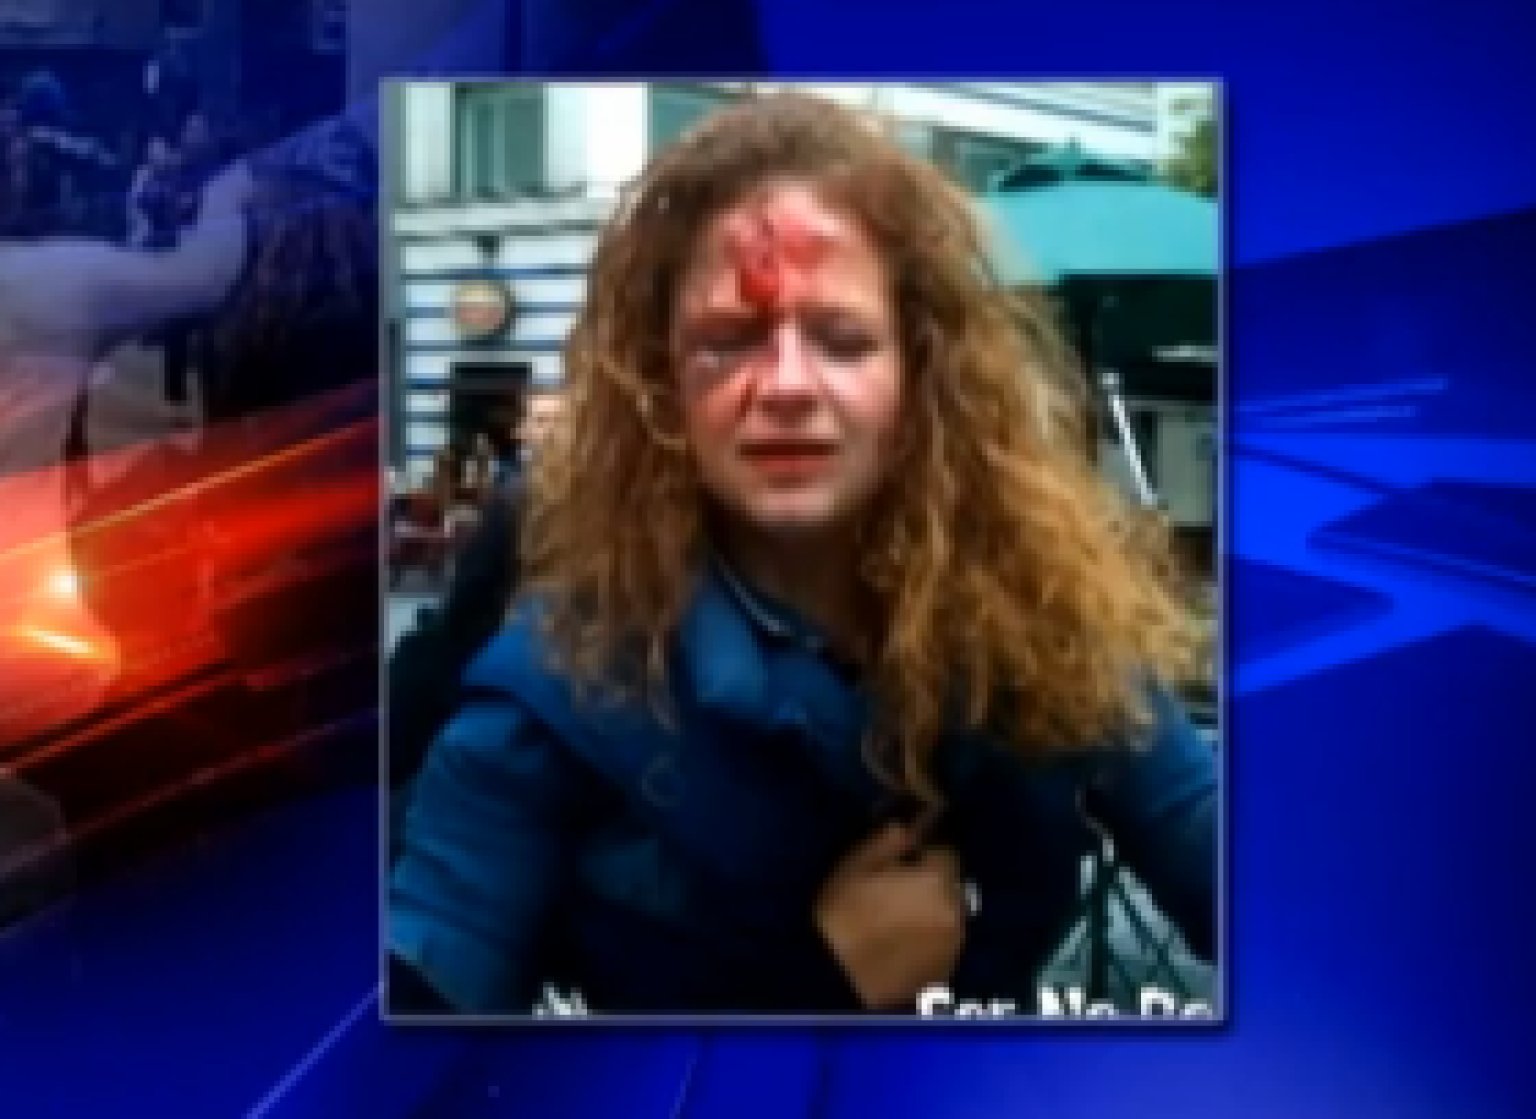 Seattle Woman Beaten By 3 Female Suspects In Cell Phone Video Sought By Police1536 x 1119